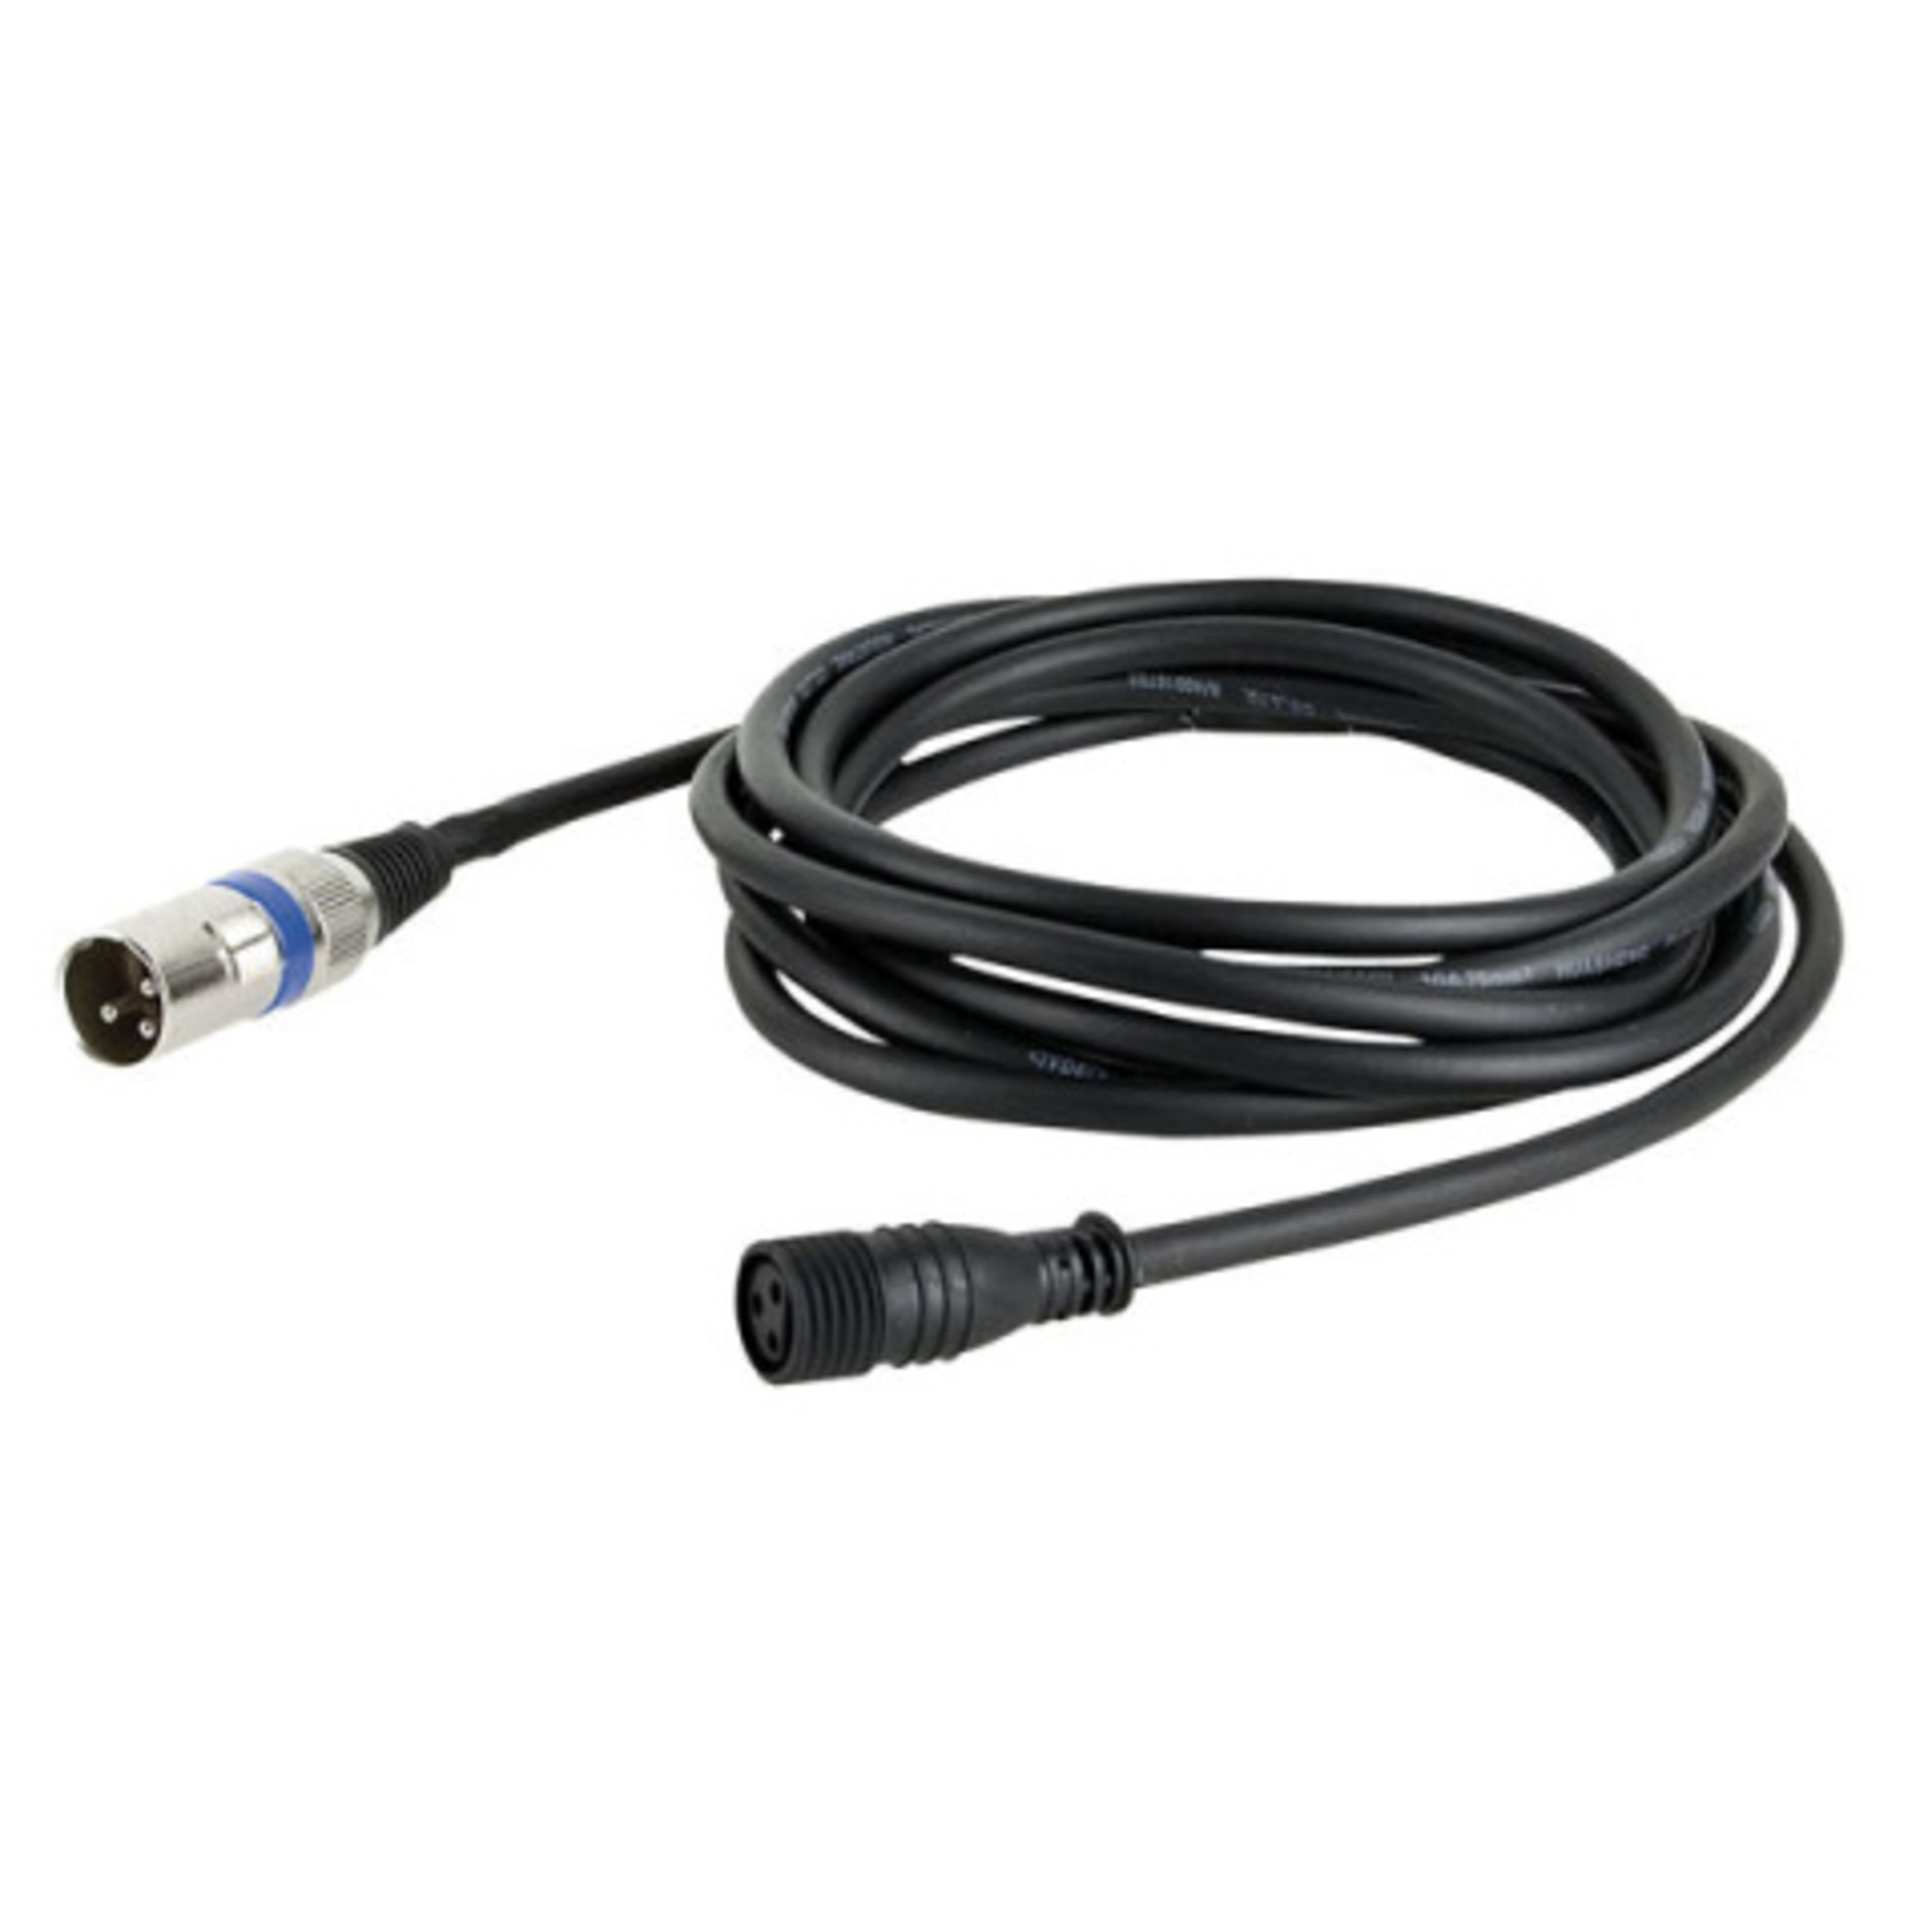 Show tec LED Discolicht, DMX Input cable 3m for Cameleon series